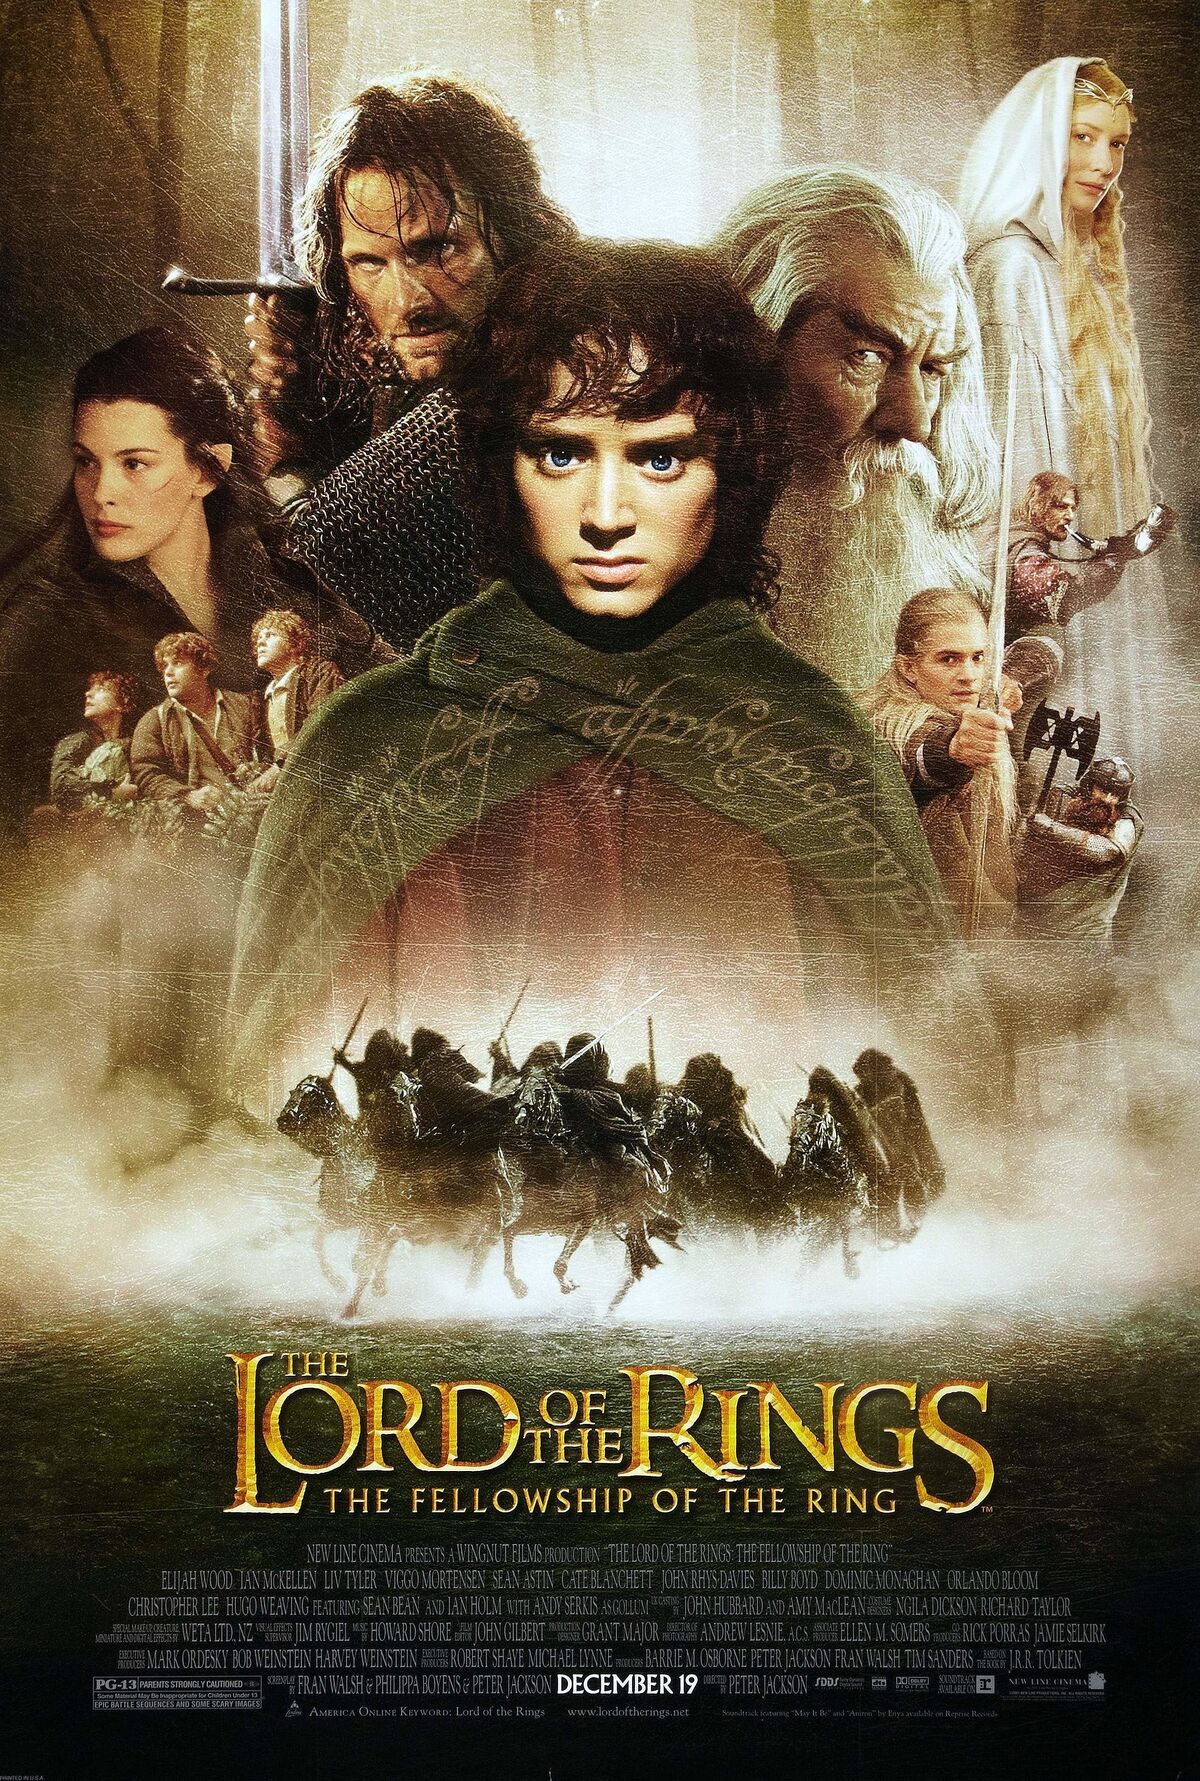 The Lord of the Rings: The Rings of Power - Wikipedia